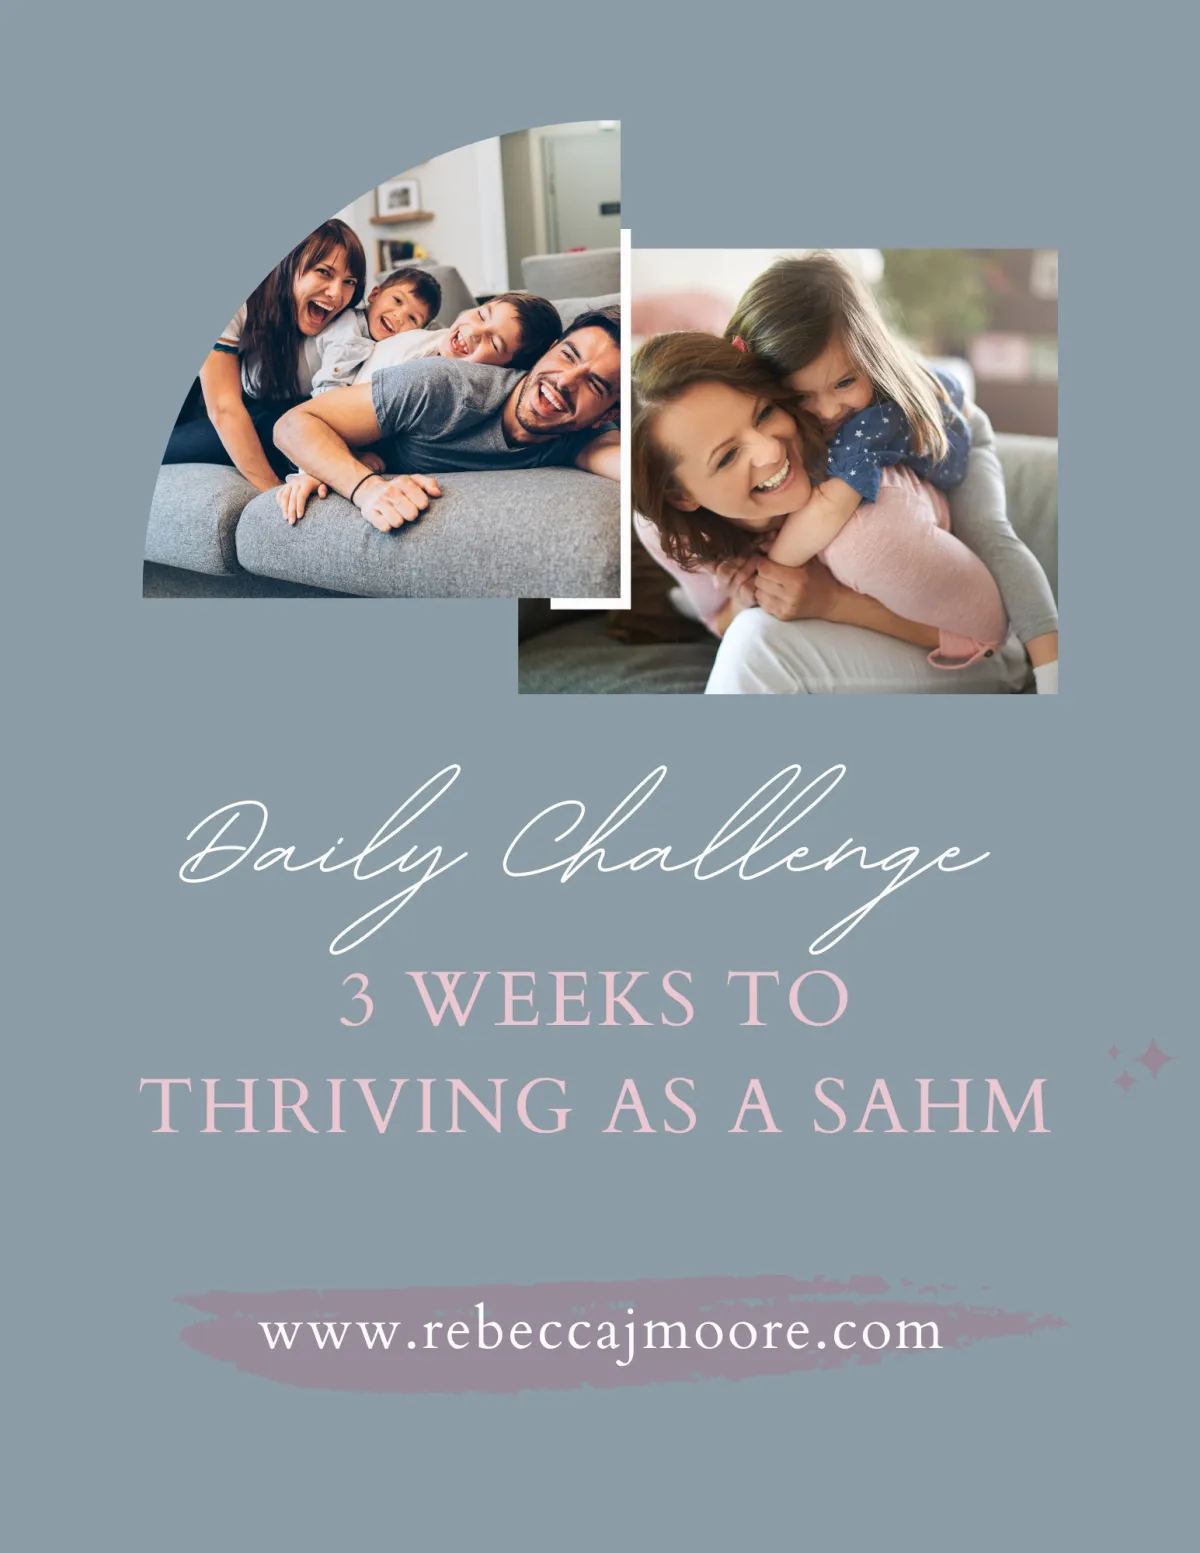 Daily Challenge - 3 Weeks to Thriving as a Stay-at-Home Mom